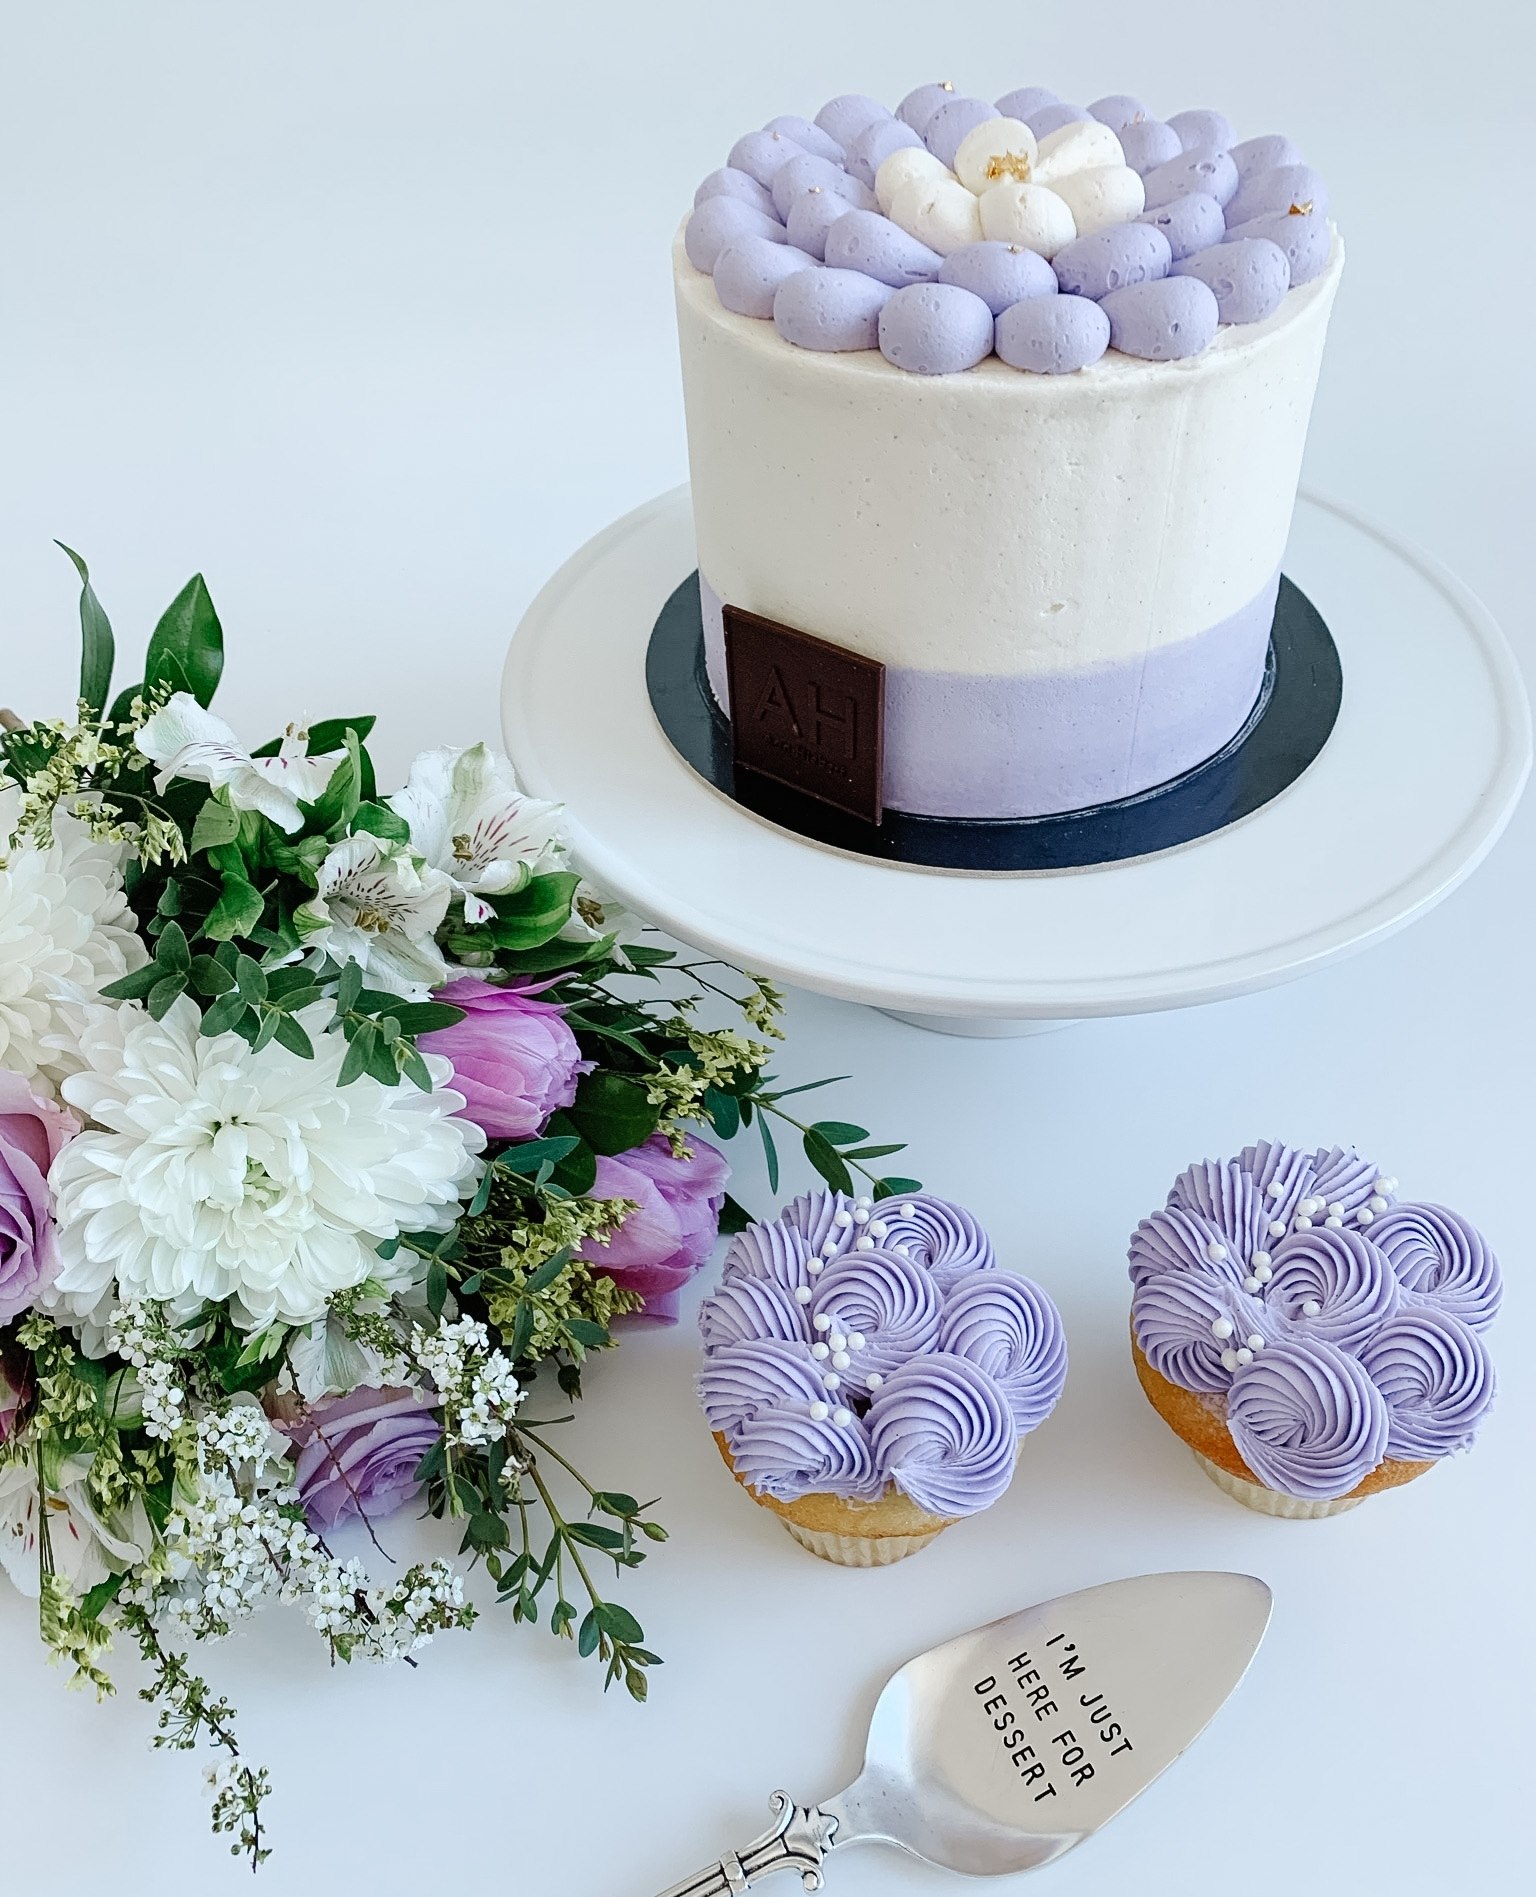 Purple Mother's Day cake from Arin Heibert subscription